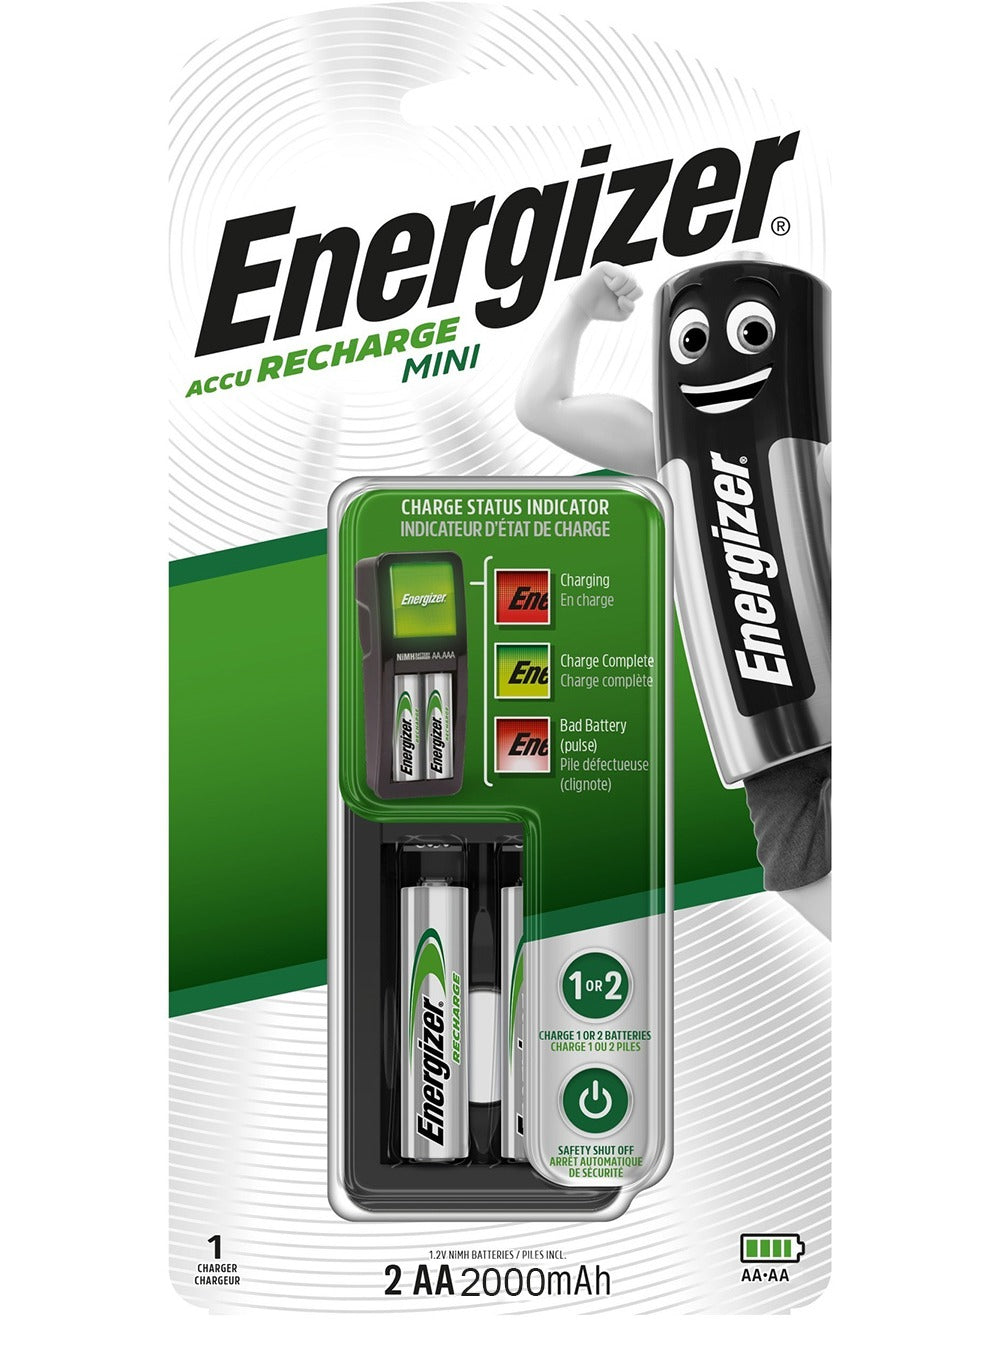 Energizer Mini charger with 2 AA Rechargeable Batteries  (2000 mAh) Multicolour